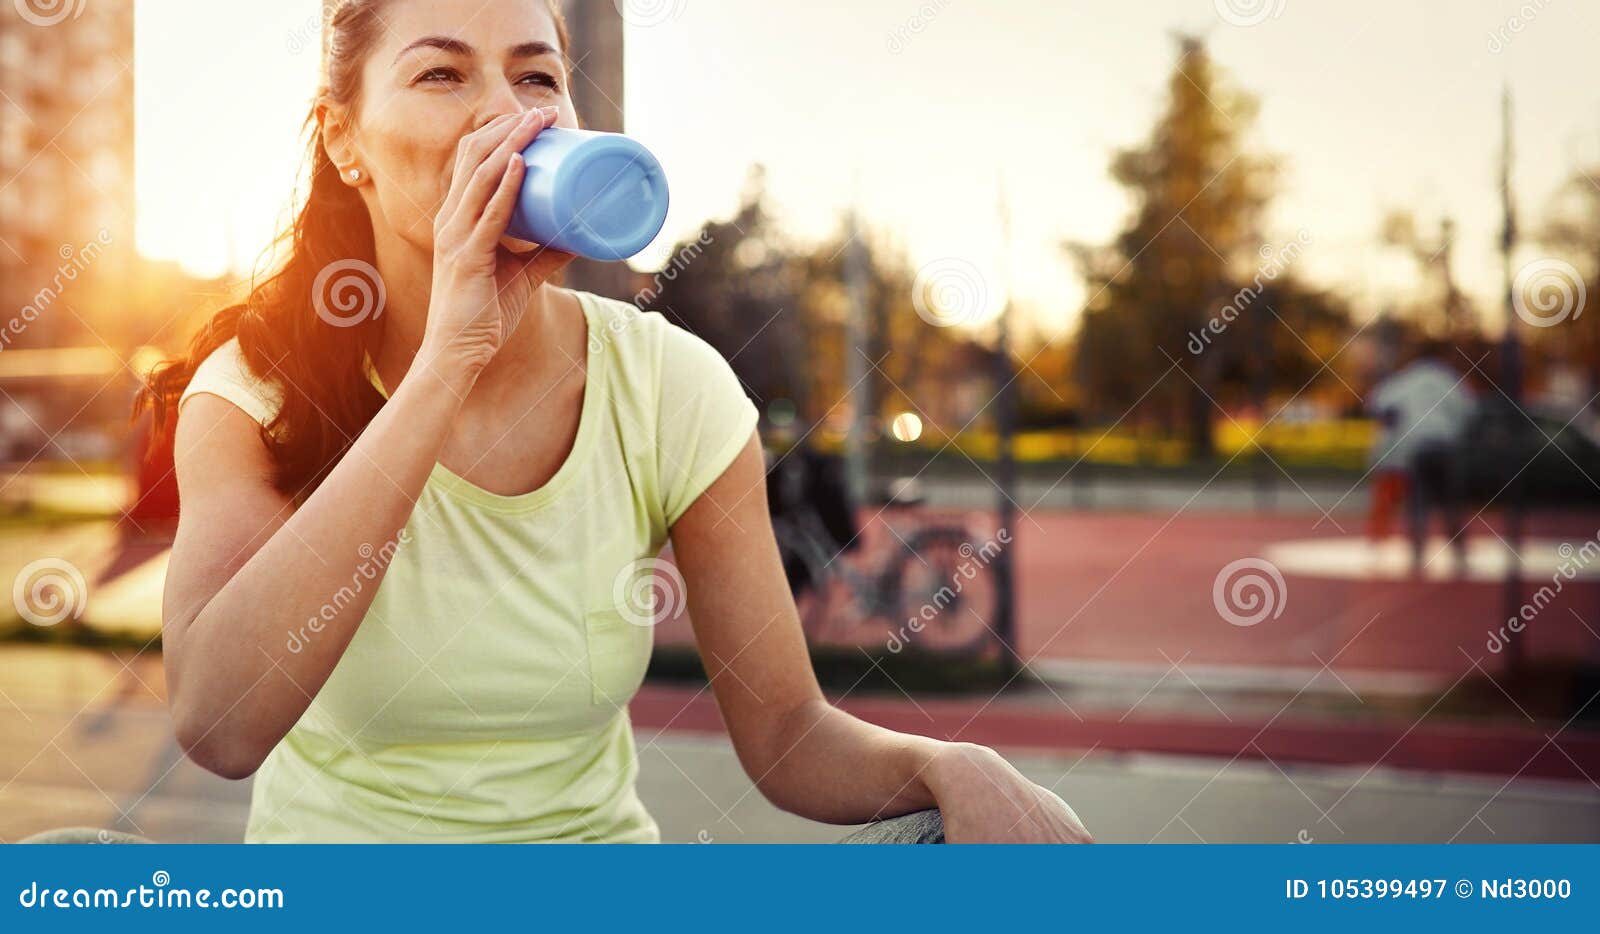 Thirsty Sportswoman Doing Her Jogging Training Stock Image - Image of ...